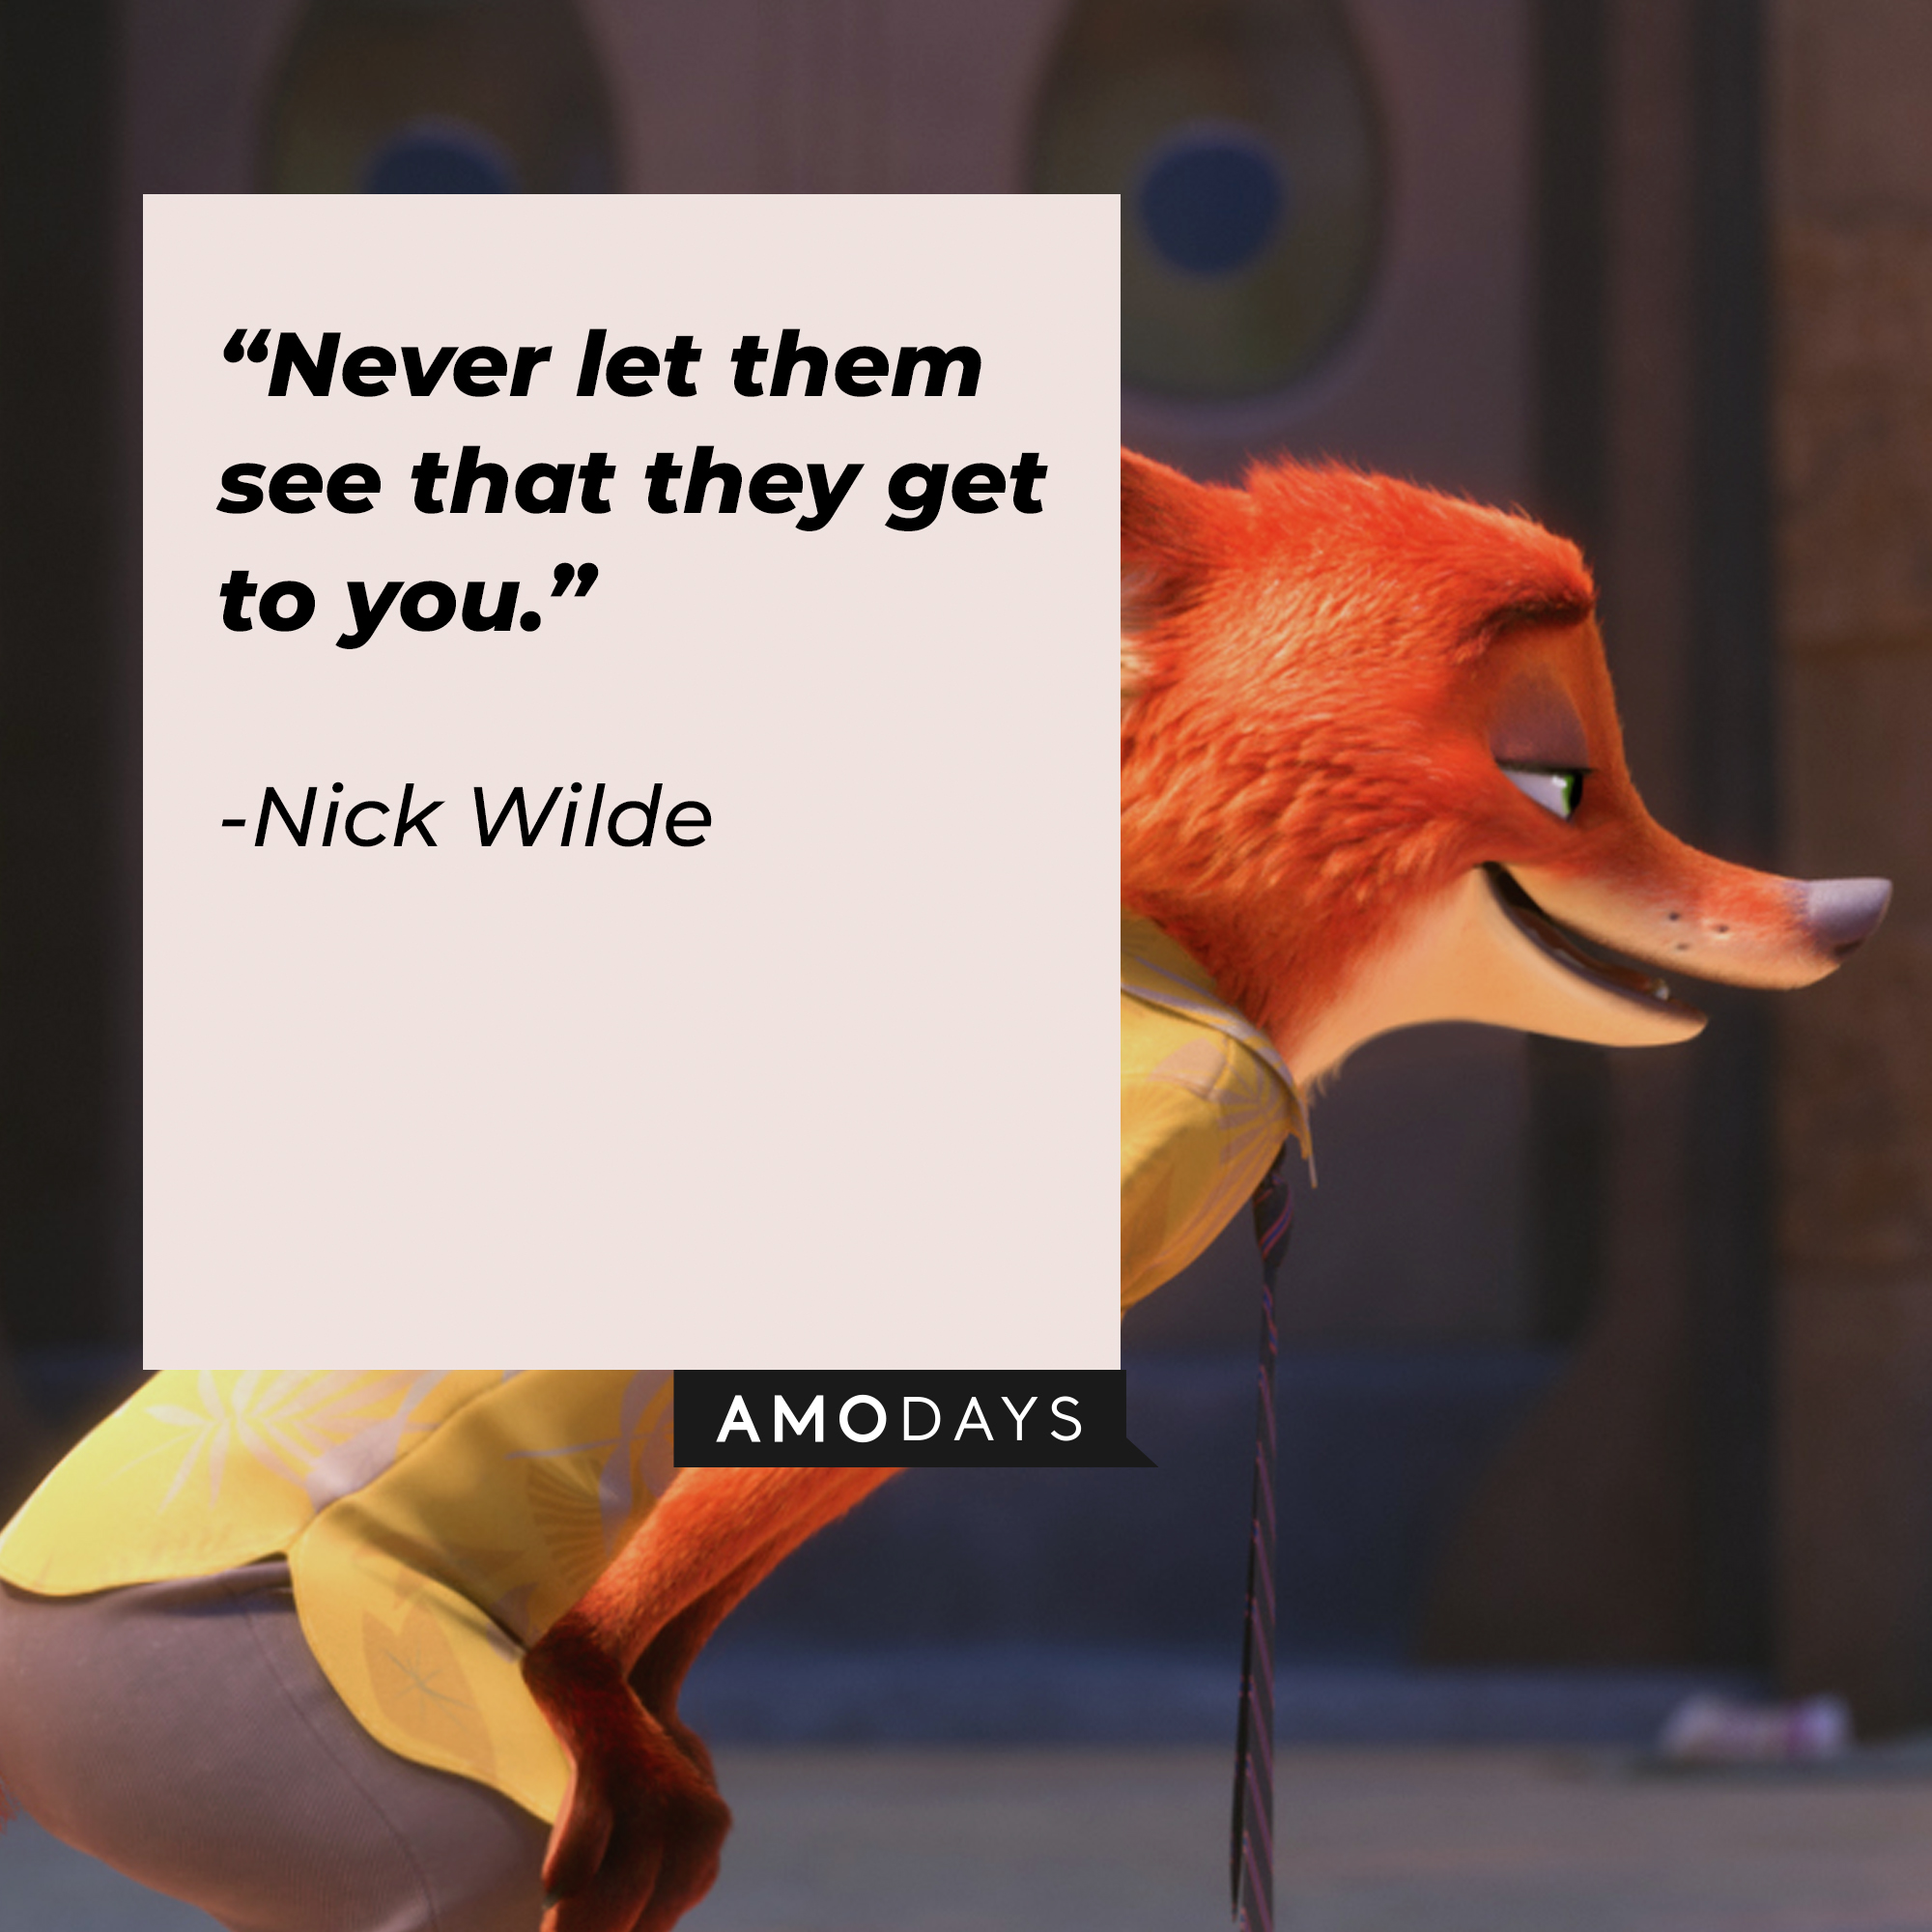 Nick Wilde, with his quote: Nick Wilde, with his quote:“You'll never be a real cop. You're a cute meter maid, though.” | Source: facebook.com/DisneyZootopia